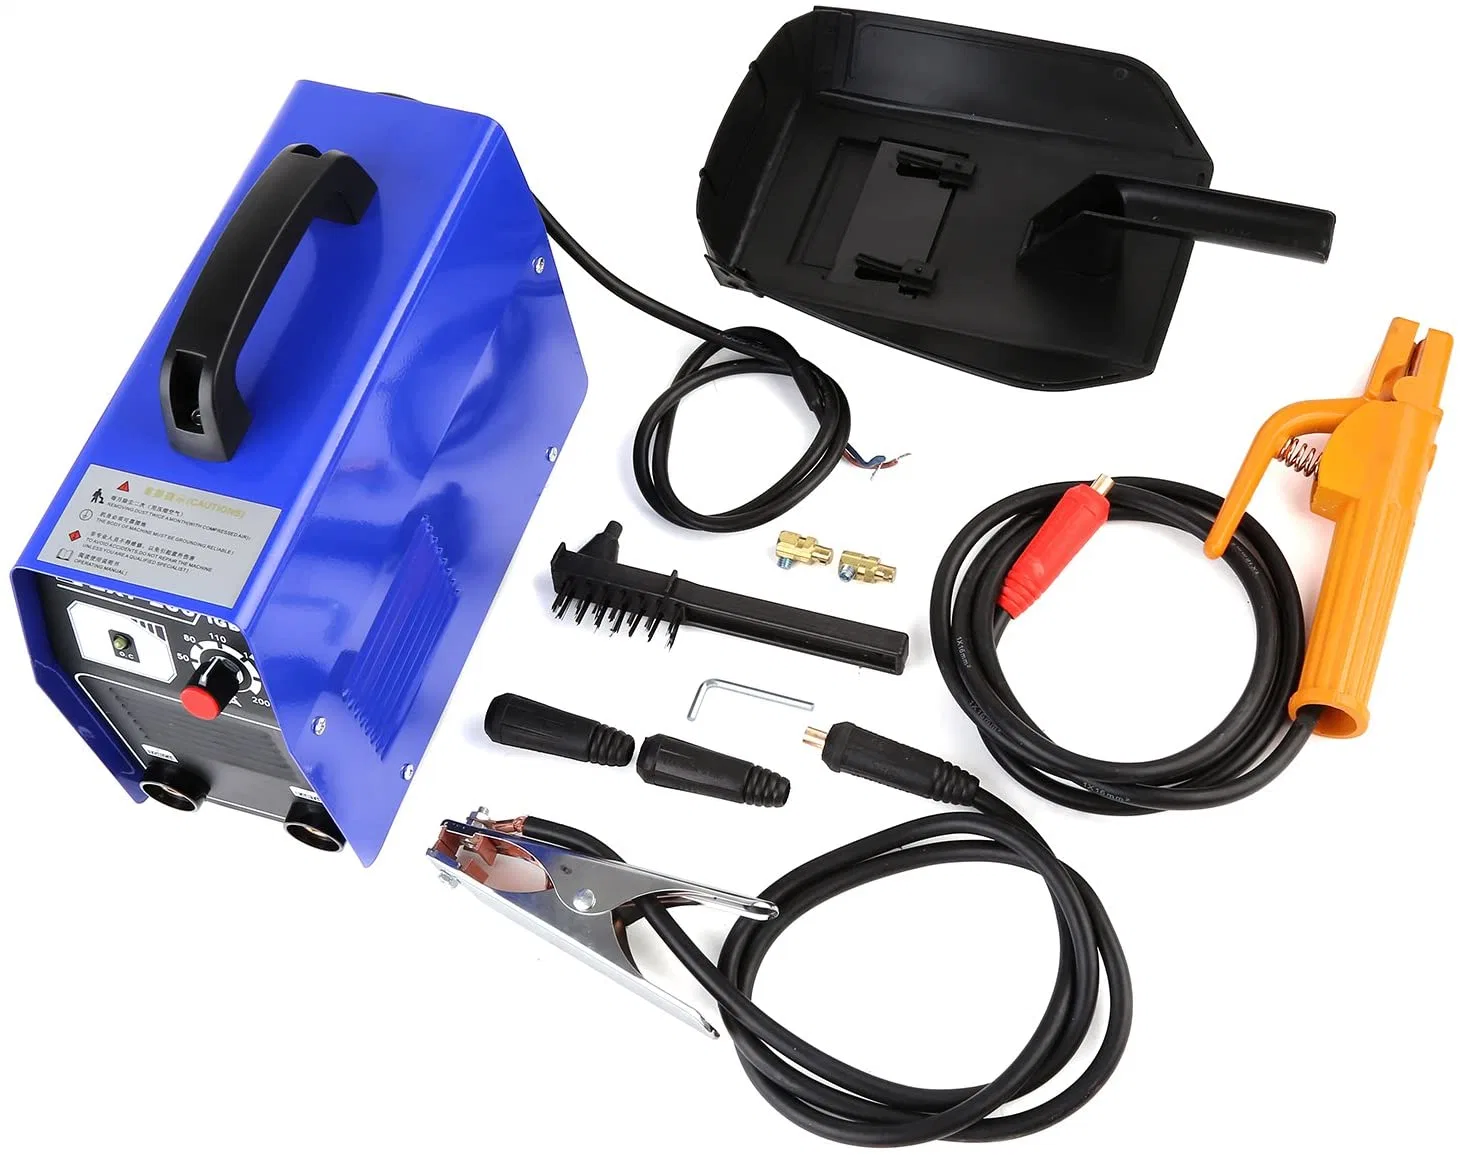 Professional Electric Inverter Cutting Machine Industrial Power Tool